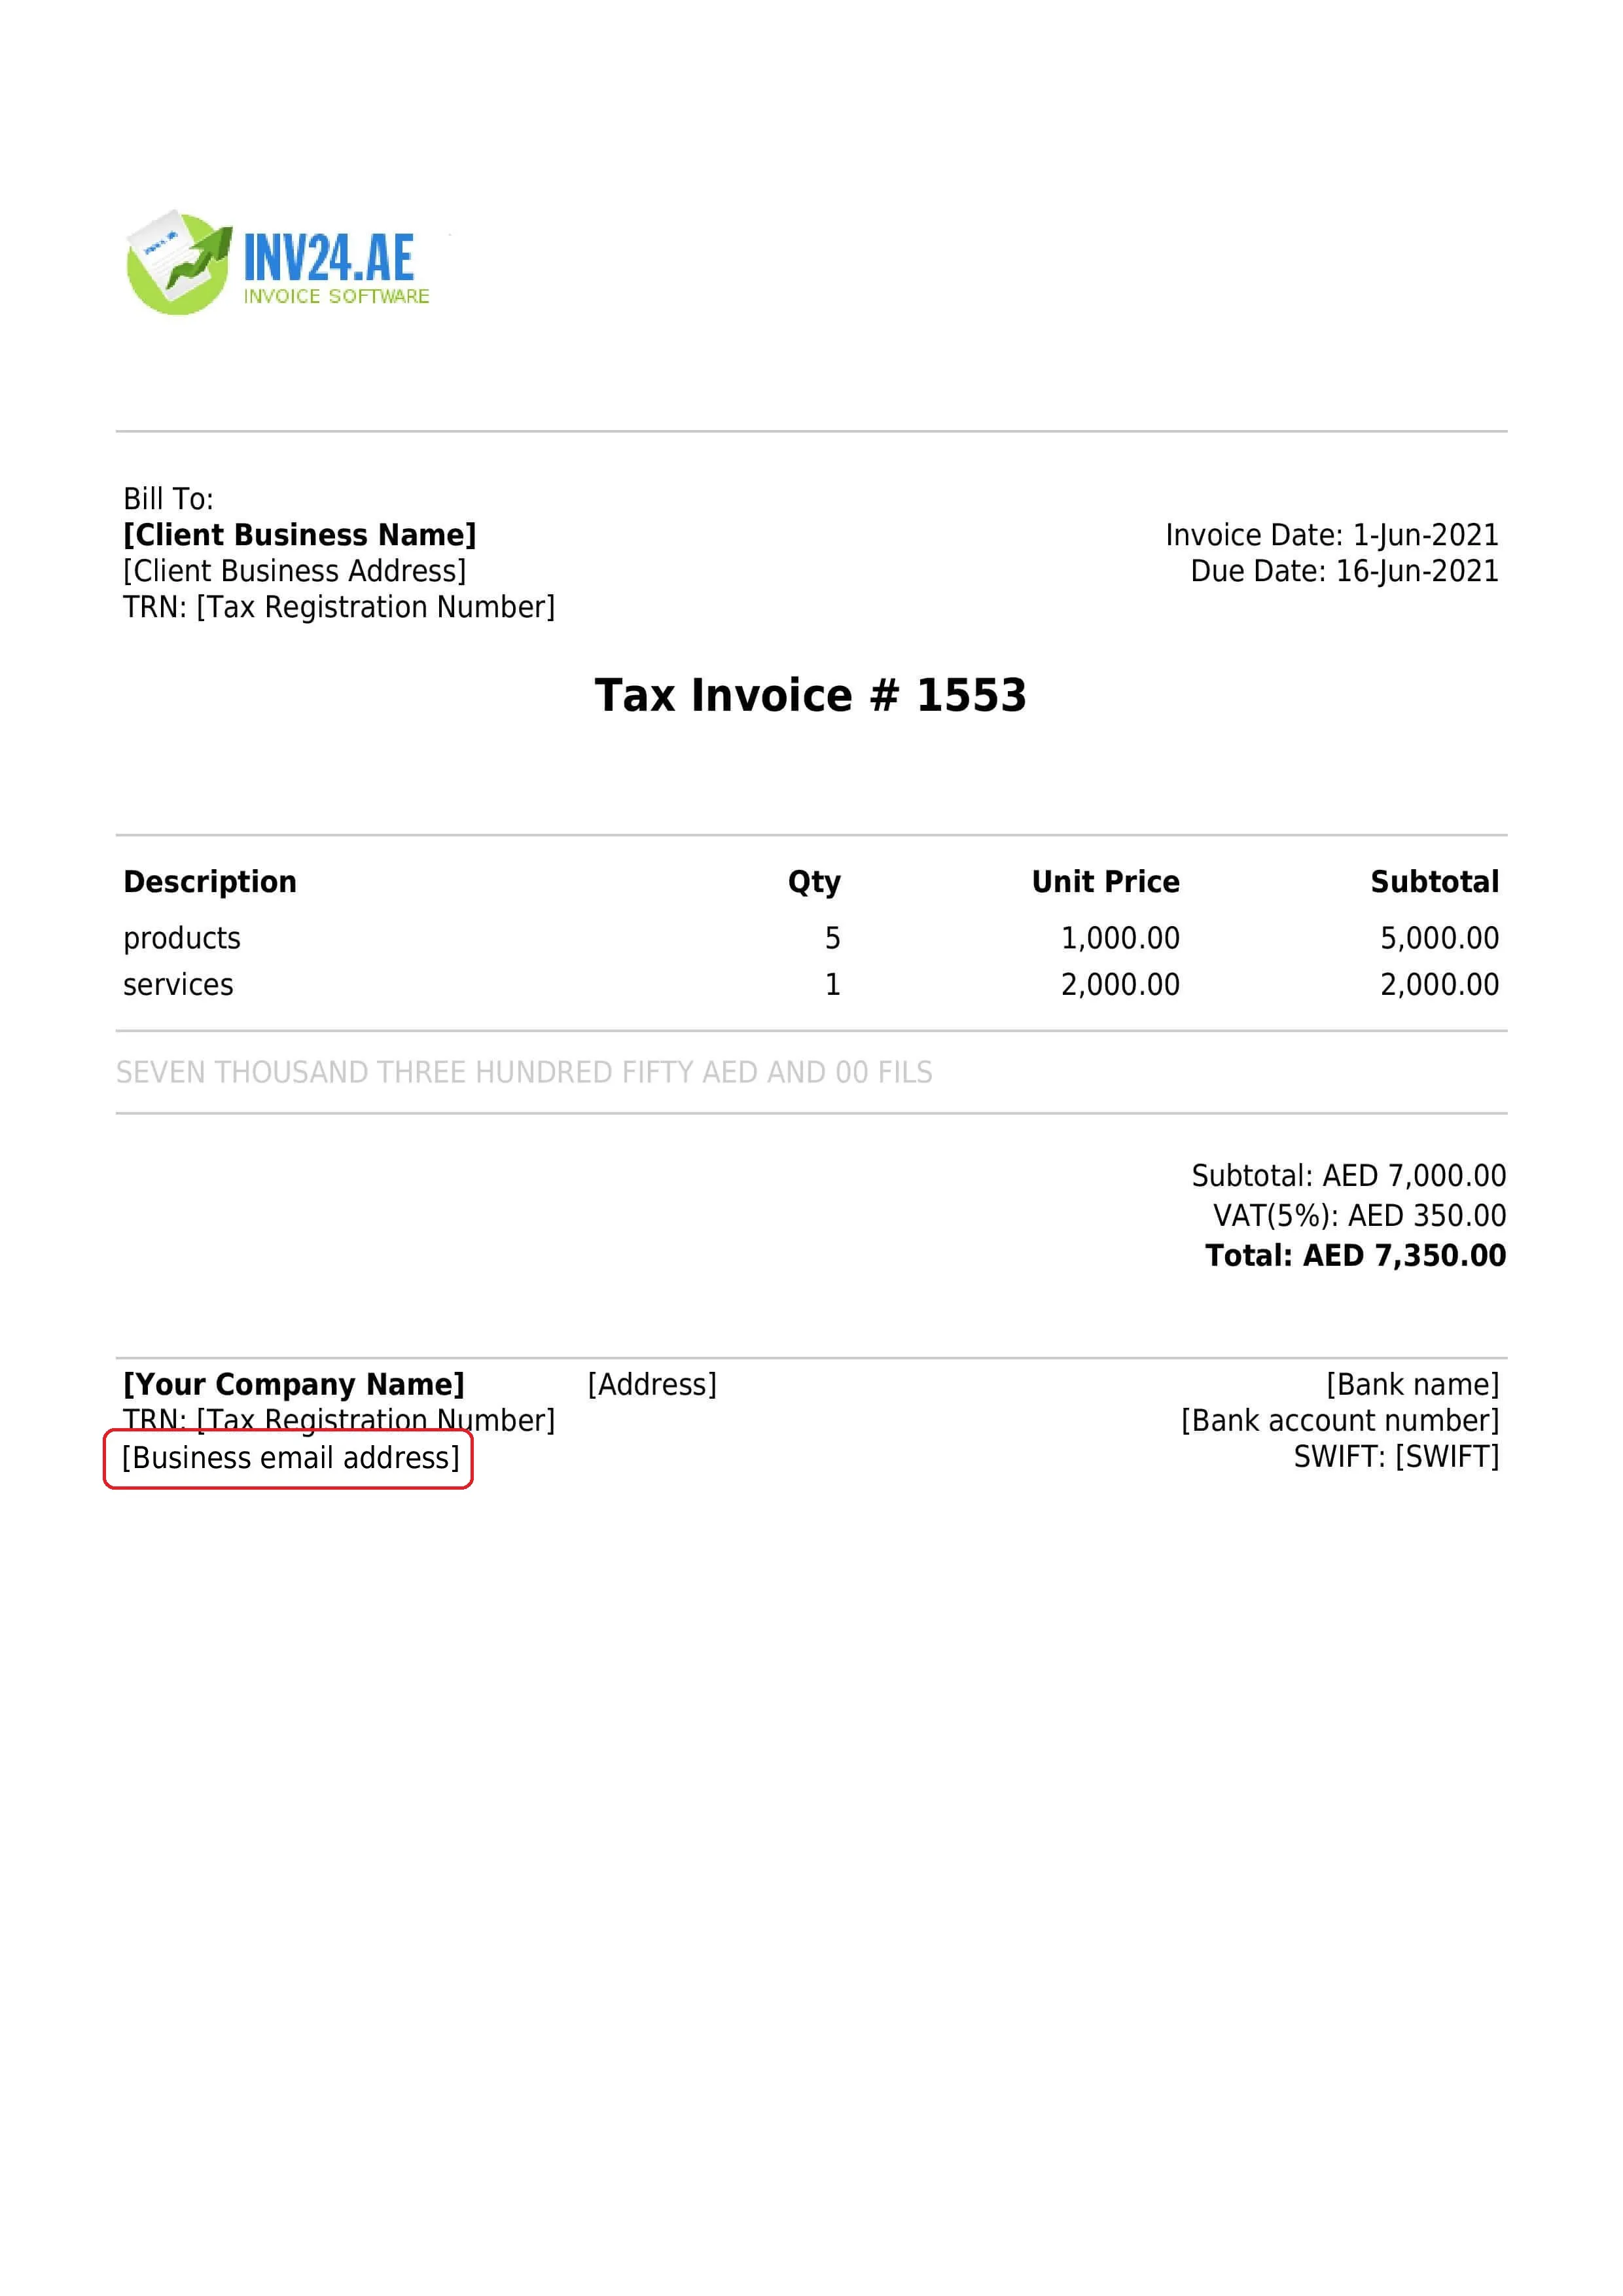 Business email address on the invoice